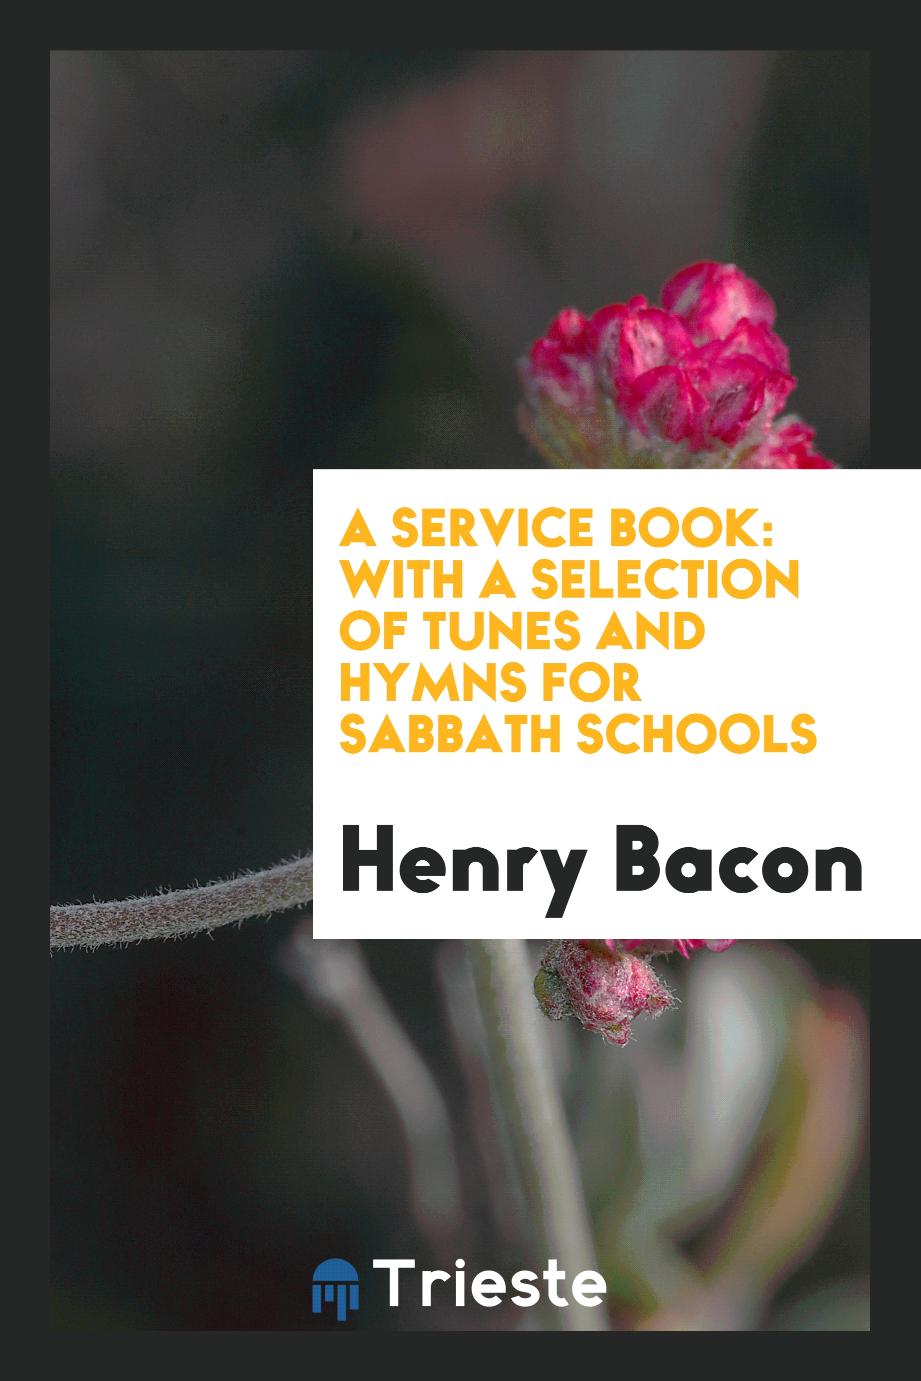 A Service Book: With a Selection of Tunes and Hymns for Sabbath Schools